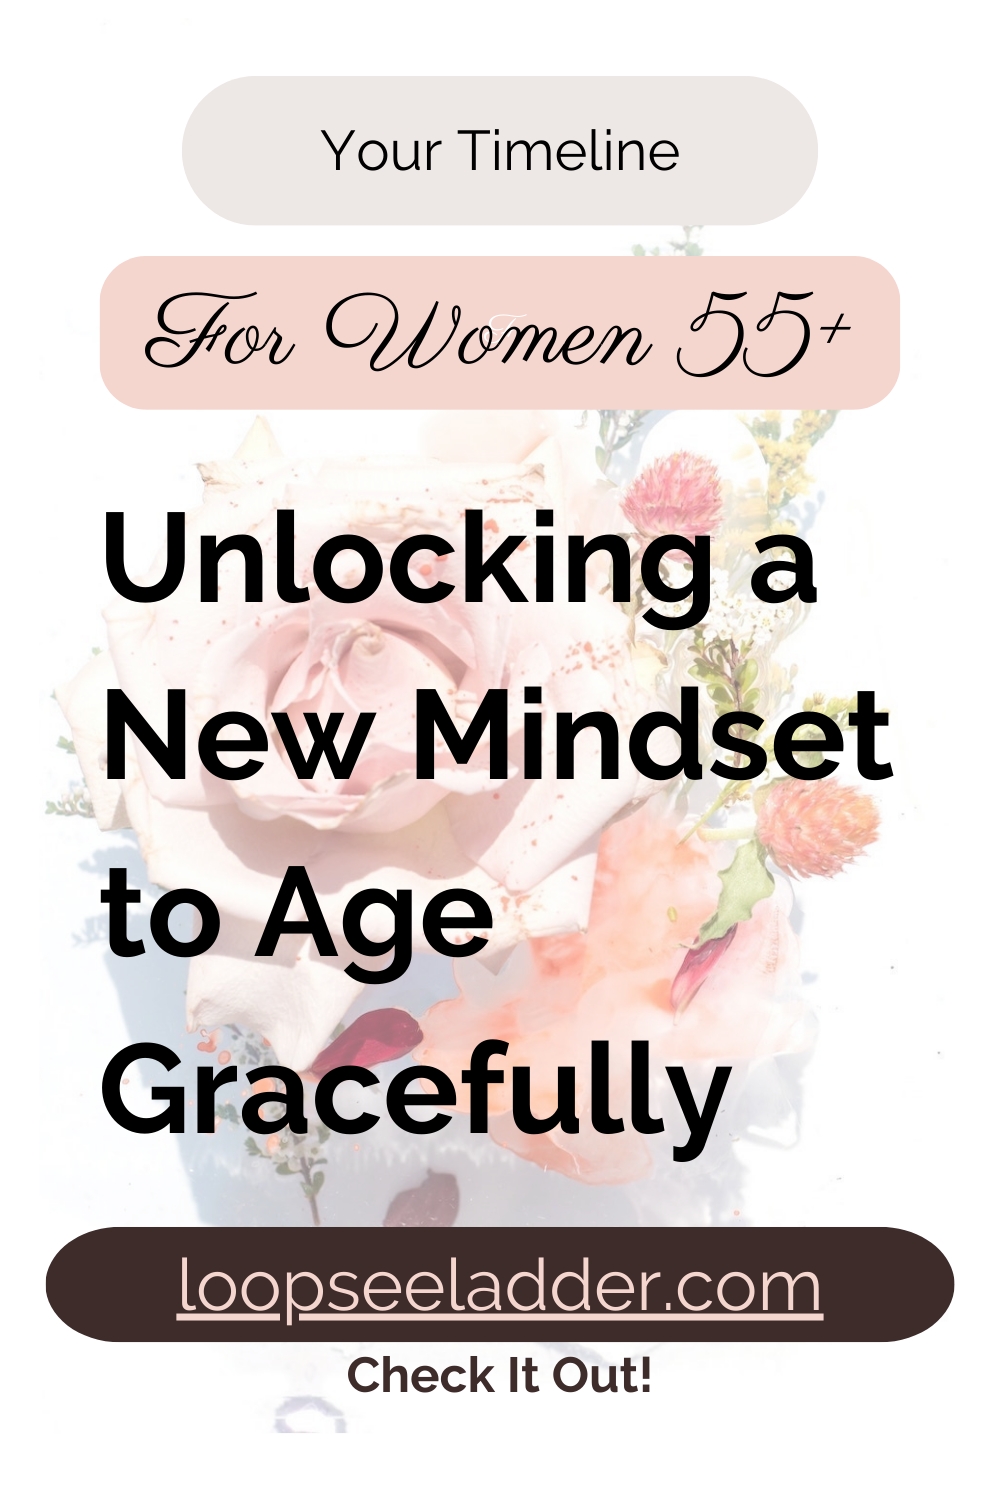 Unlocking A New Mindset: The Growth Ladder Approach to Aging Gracefully